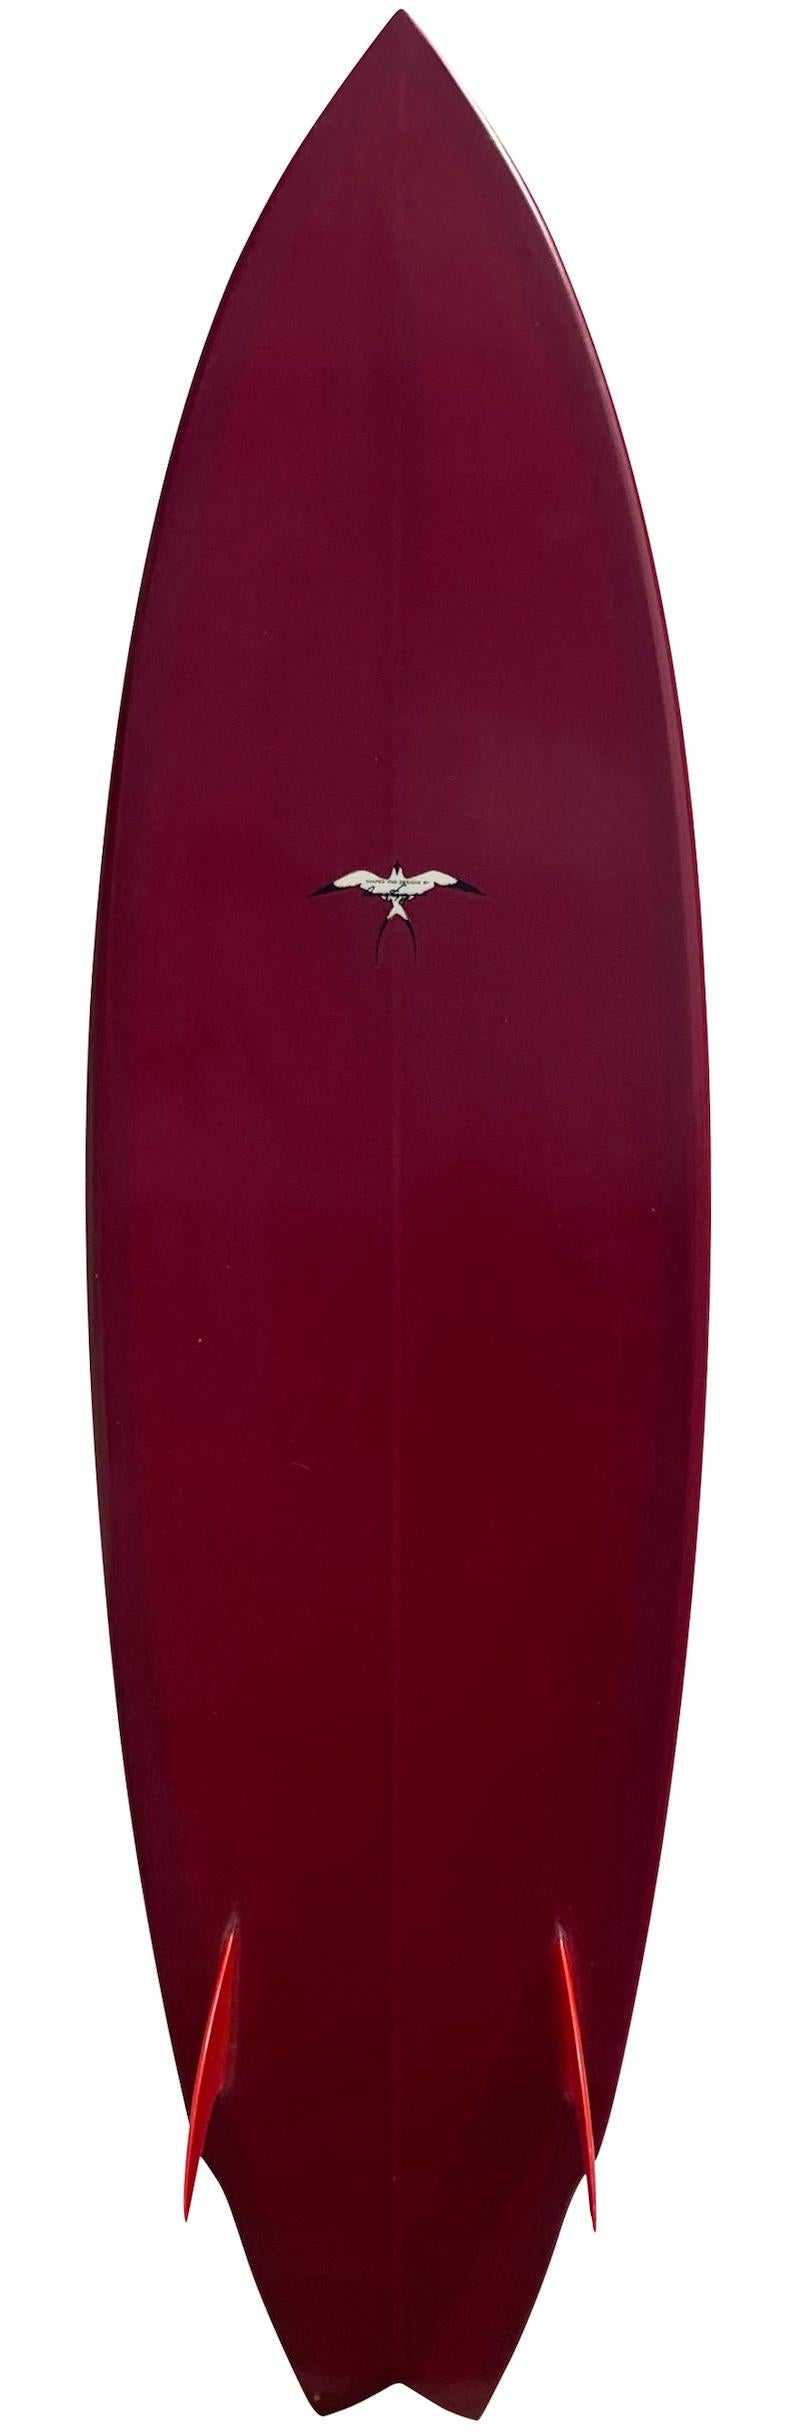 1990s Donald Takayama twin fin shortboard surfboard shaped by the late Donald Takayama (1943-2012). Features a beautiful red tint with matching red fins. Signed by the late Donald Takayama. A great example of a retro twin fin surfboard shaped by a